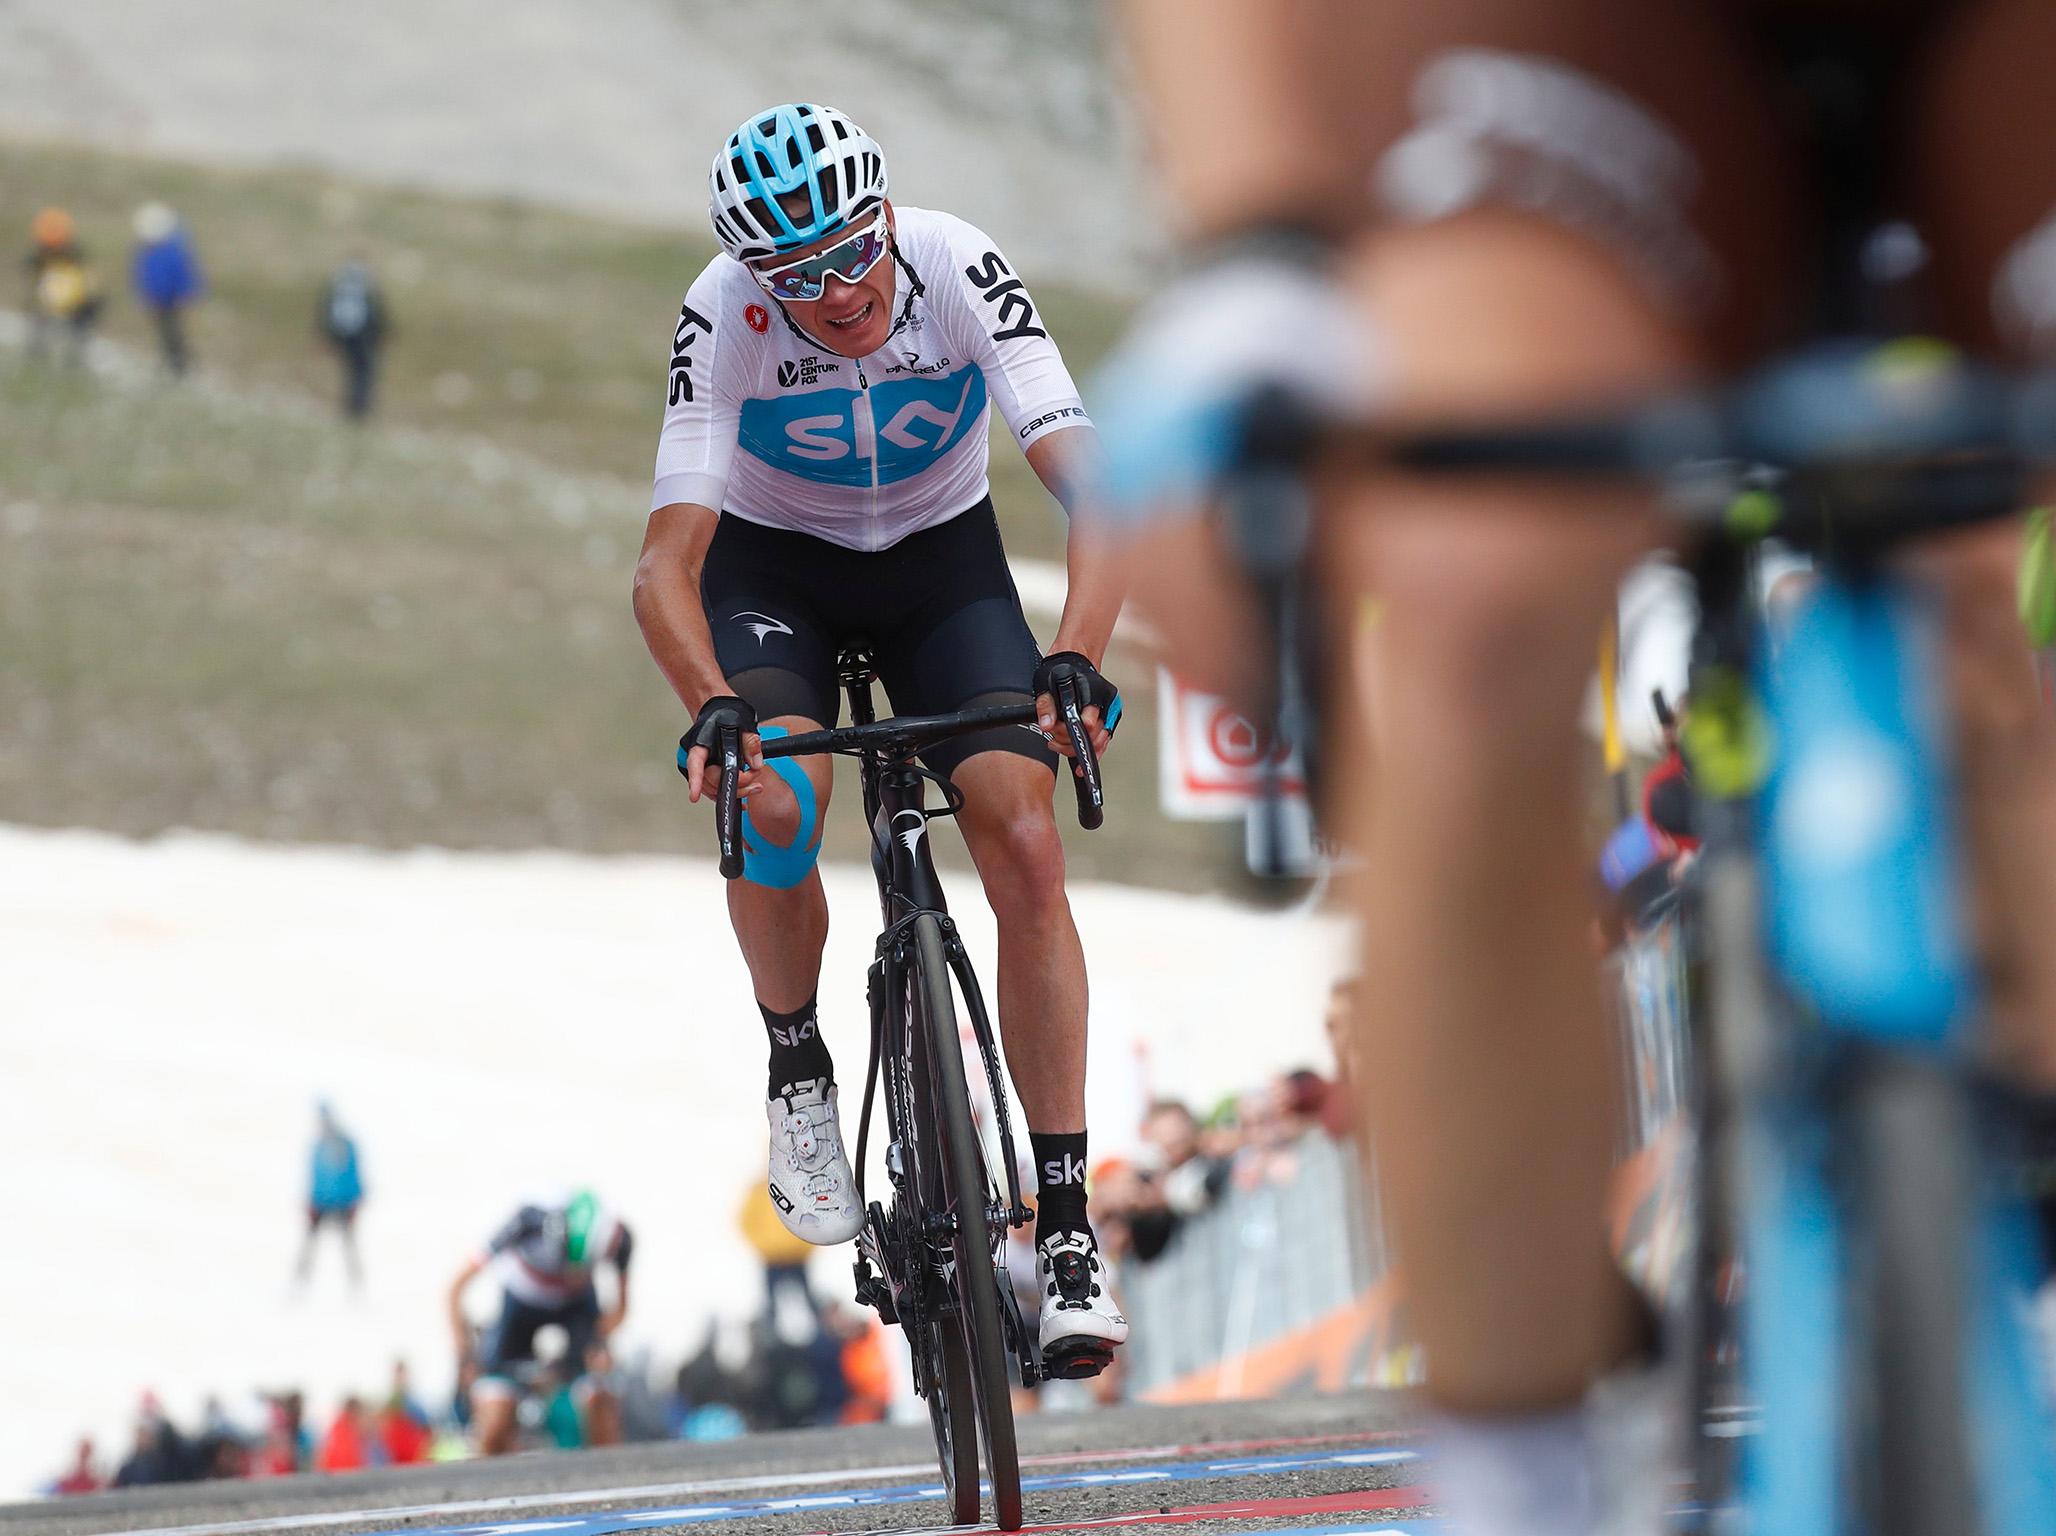 Chris Froome has struggled to keep pace with the leaders